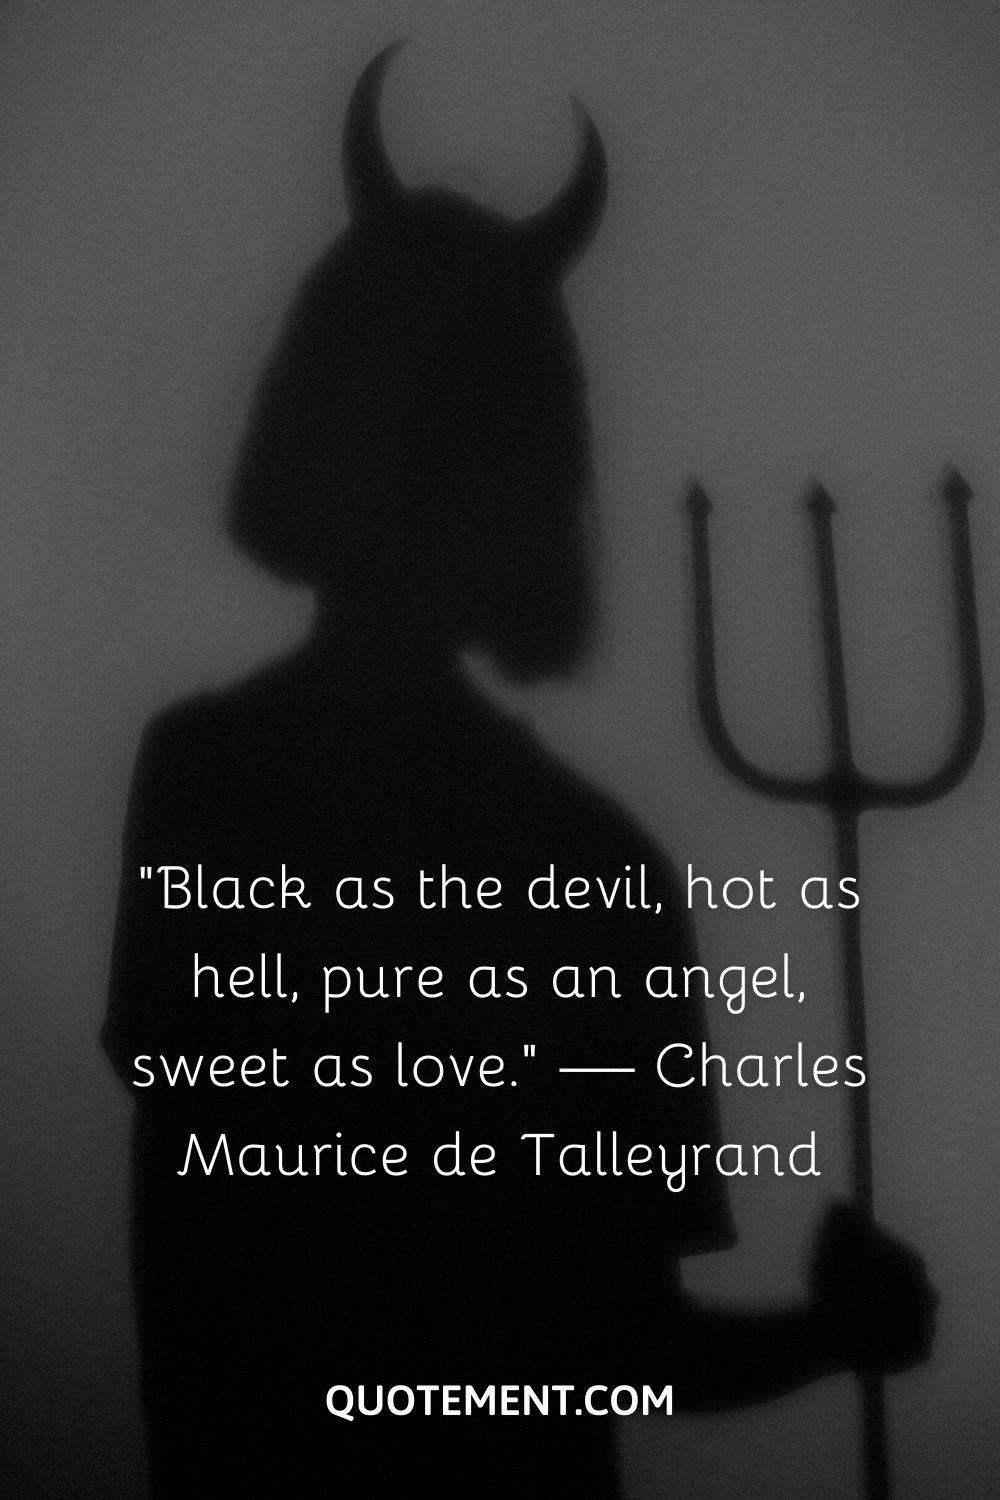 “Black as the devil, hot as hell, pure as an angel, sweet as love.” — Charles Maurice de Talleyrand